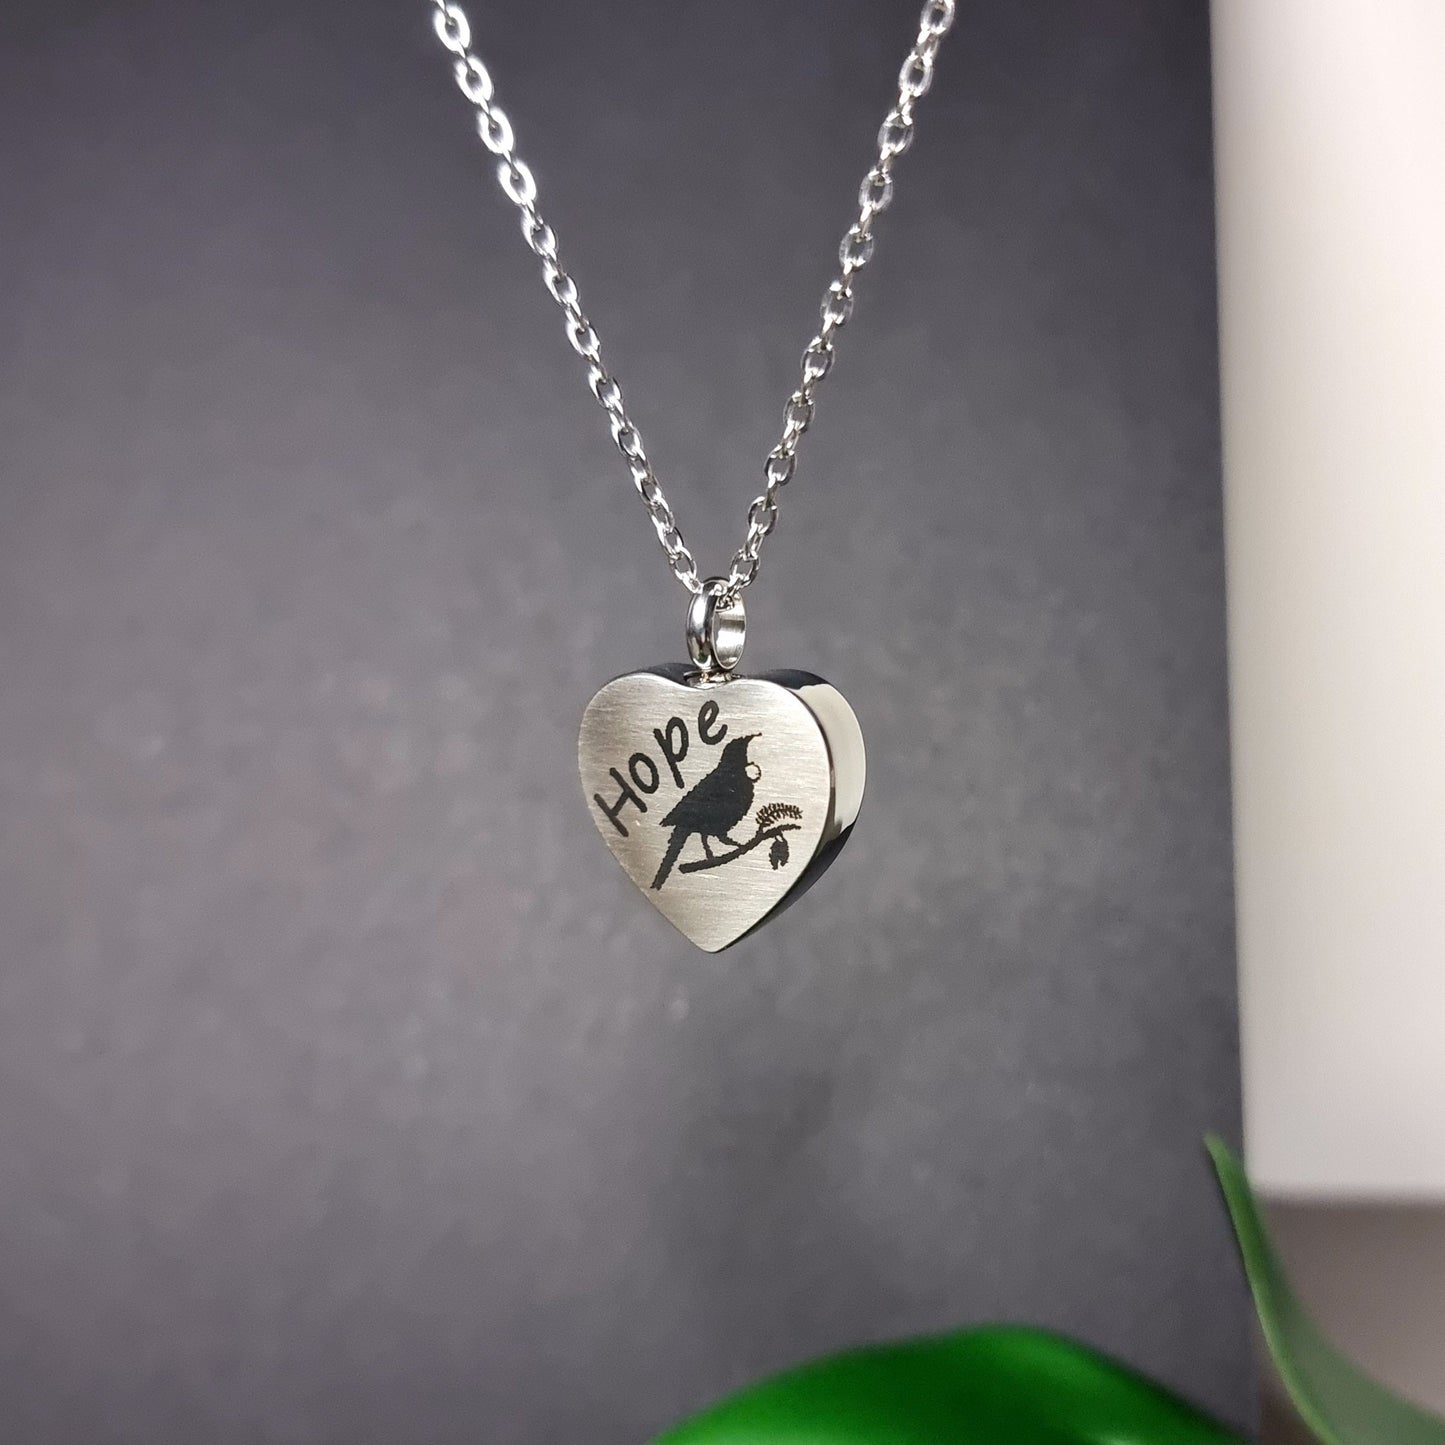 Tui Hope Engraved Keepsake Memorial Necklace Urn for cremation ashes or pet hair